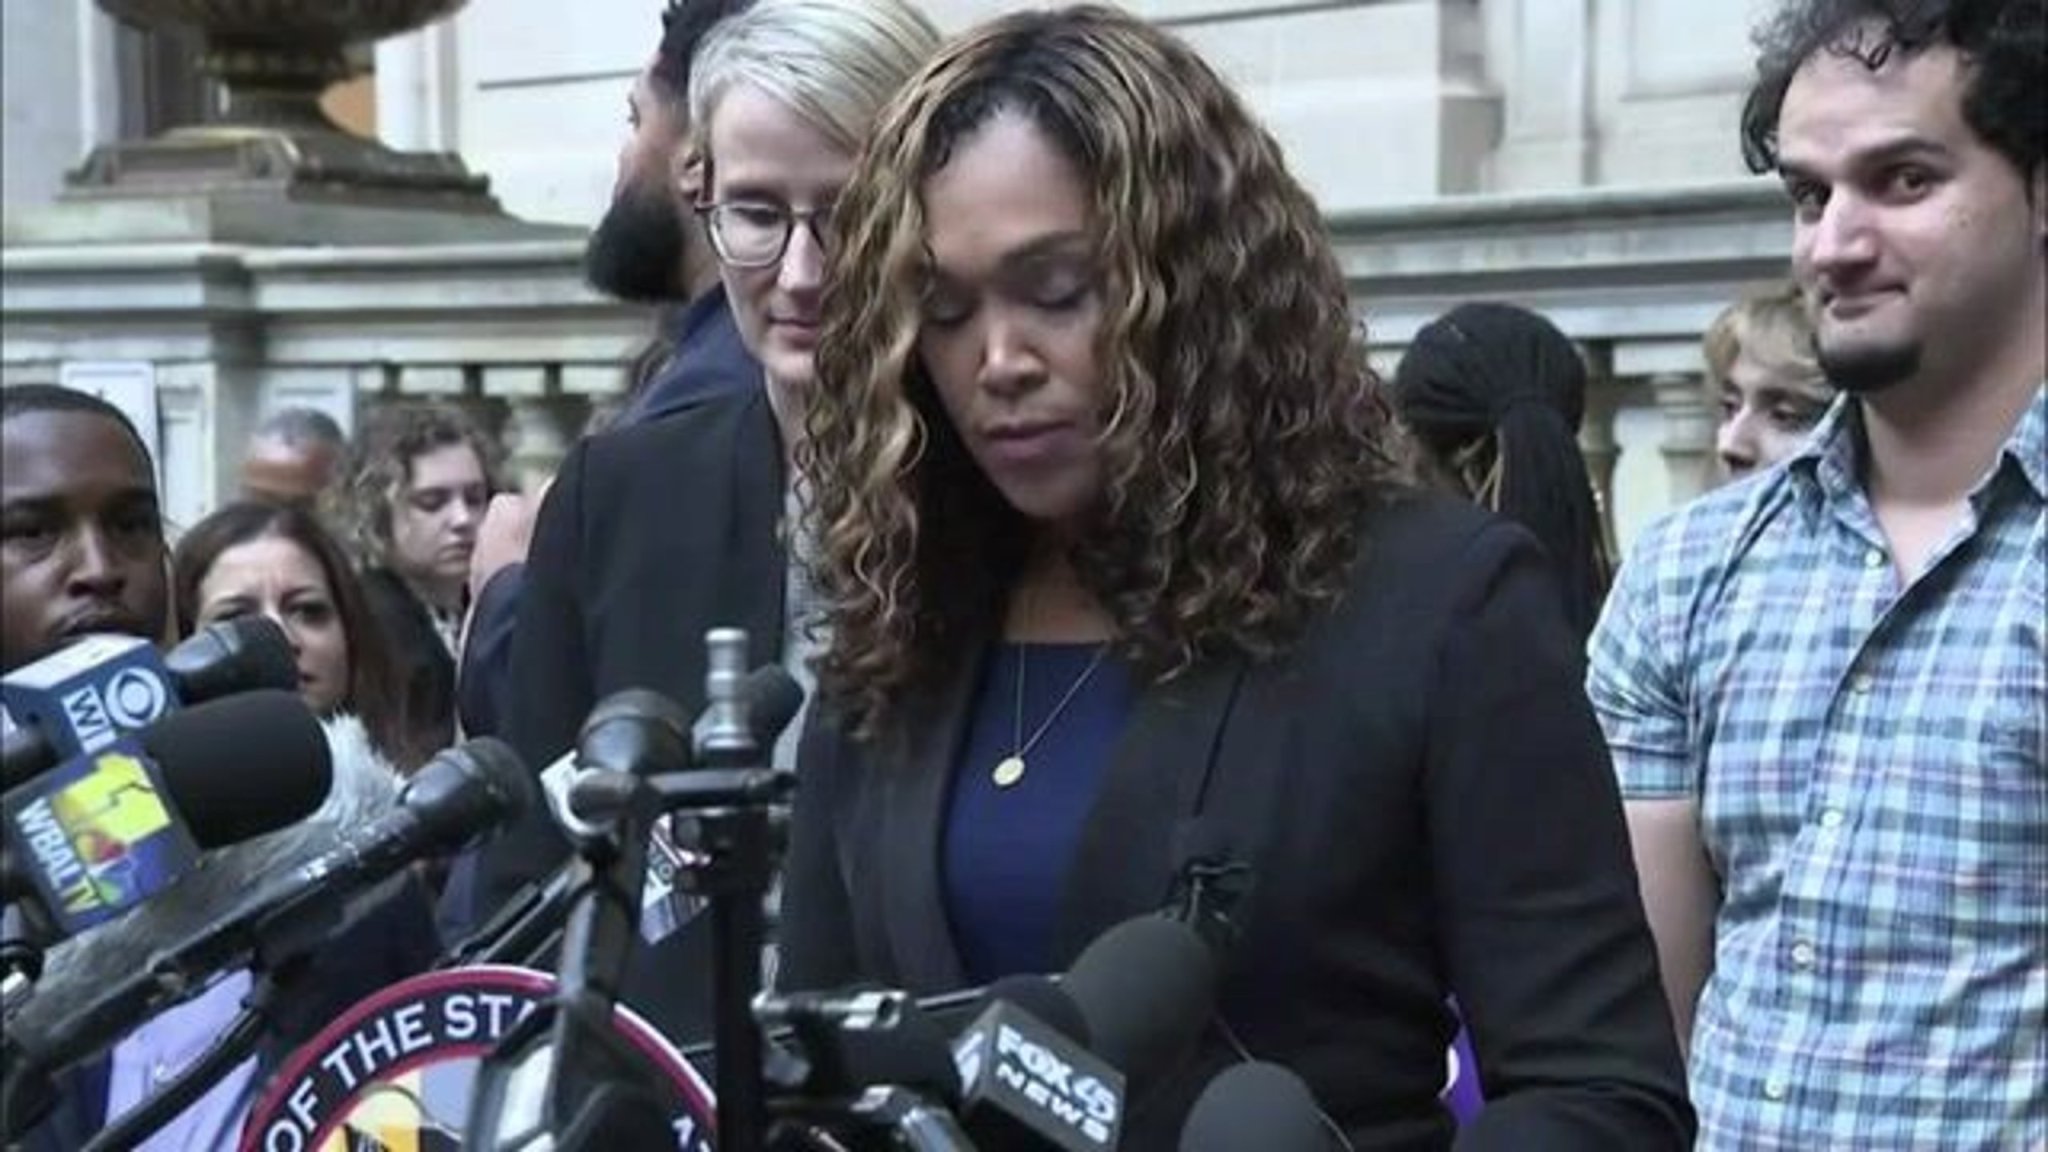 Baltimore State's Attorney Marilyn Mosby details what her investigation uncovered, leading Adnan Syed's release.